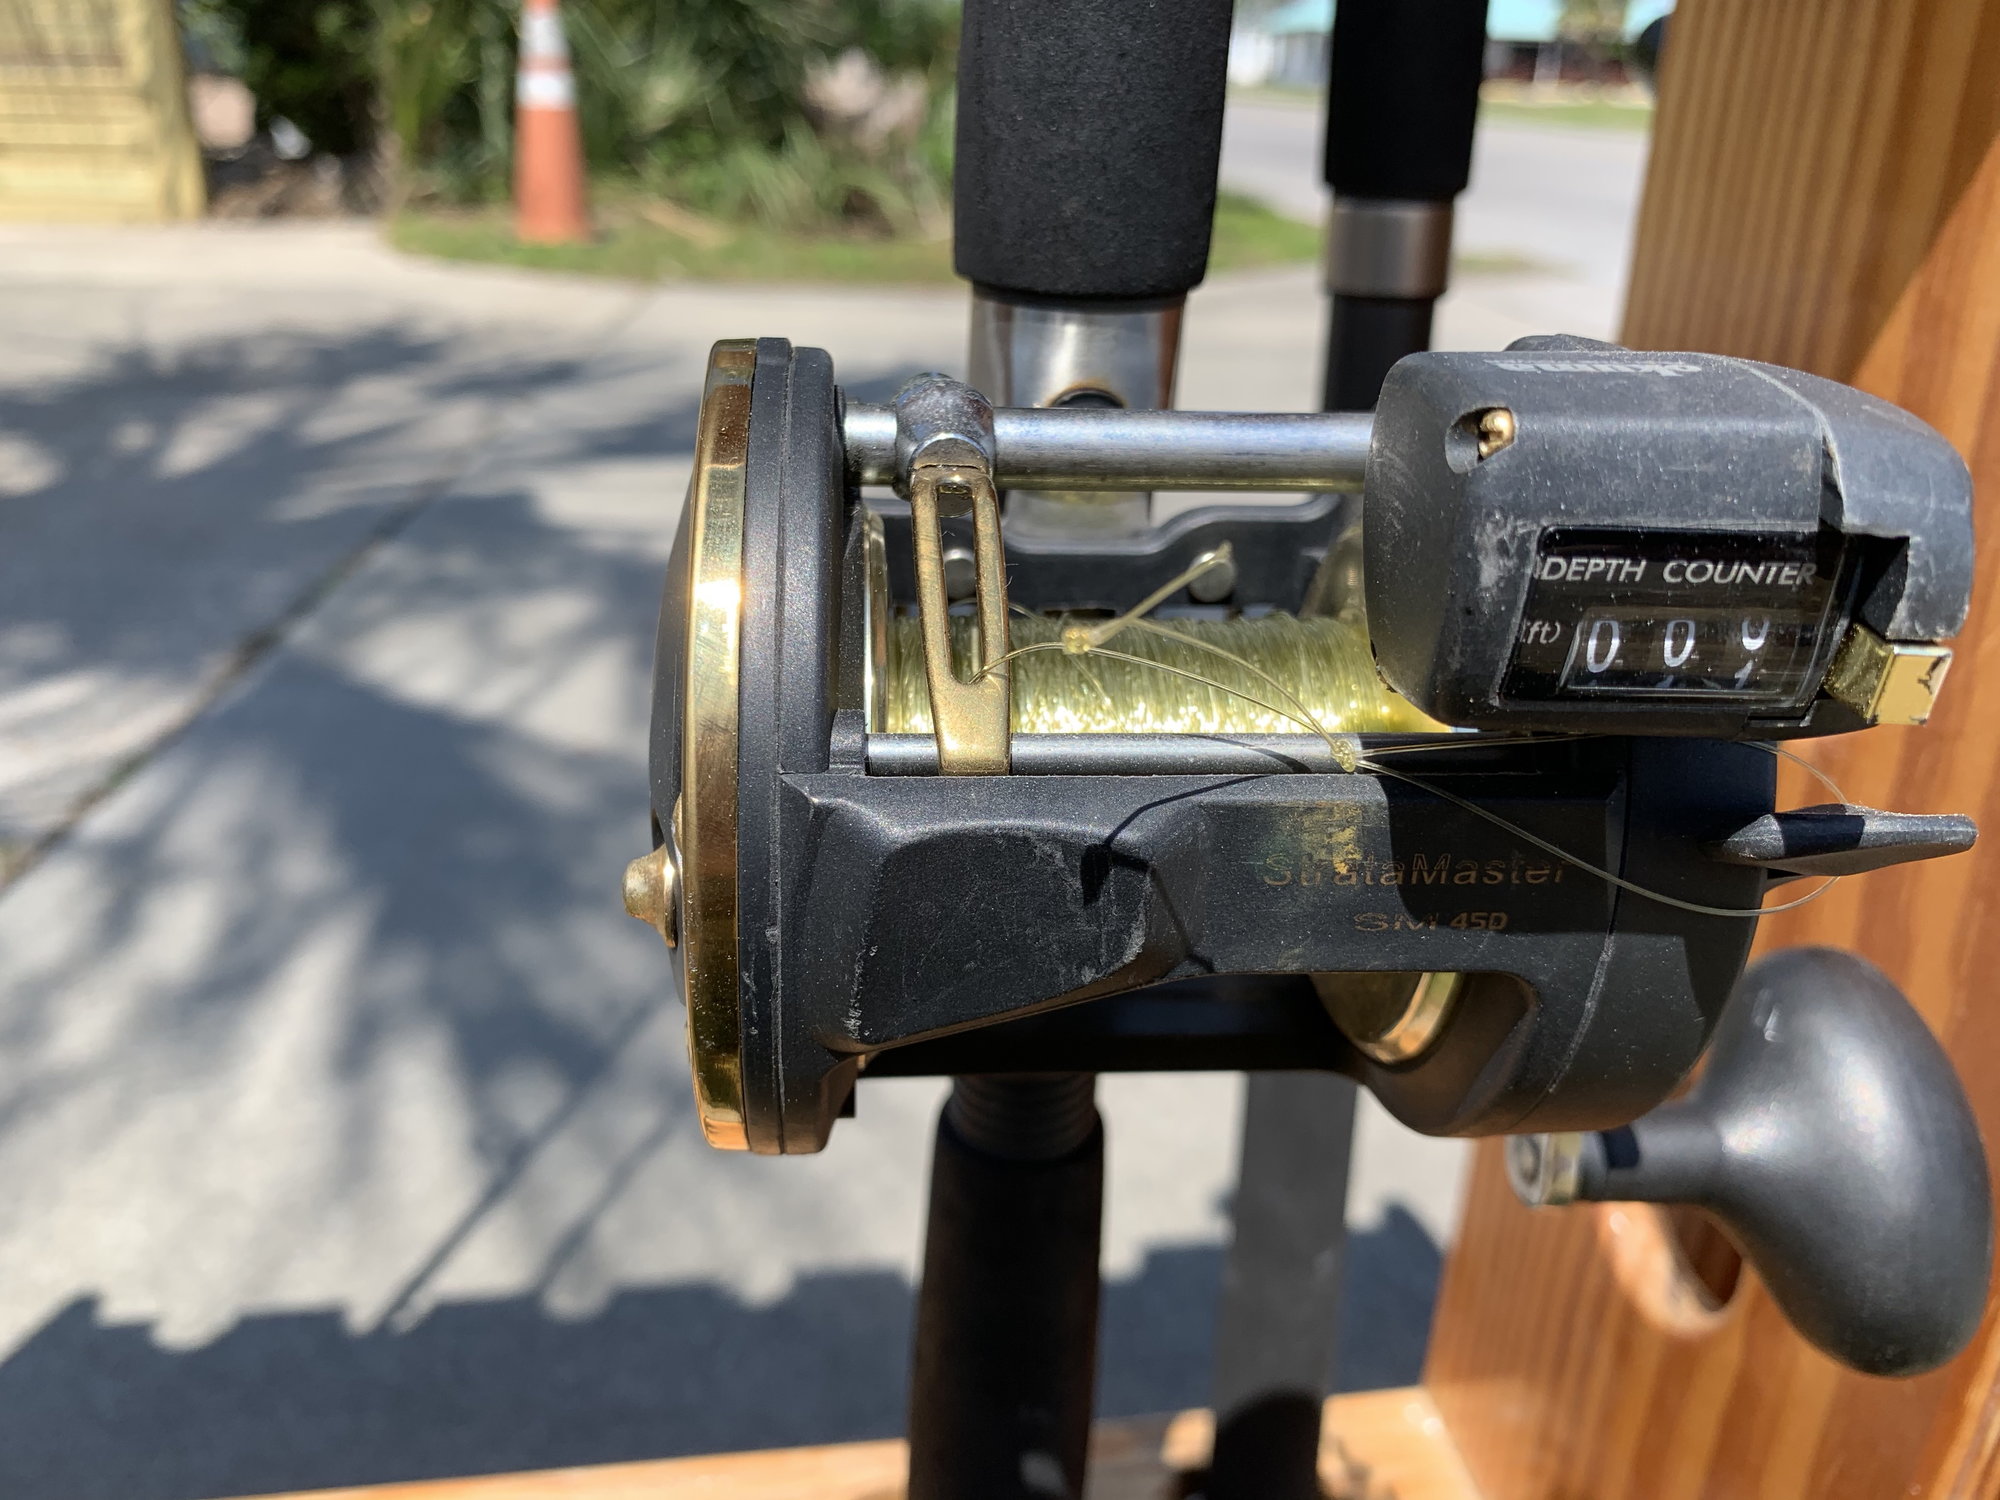 Need a new Handle for Okuma Spinning Reel - The Hull Truth